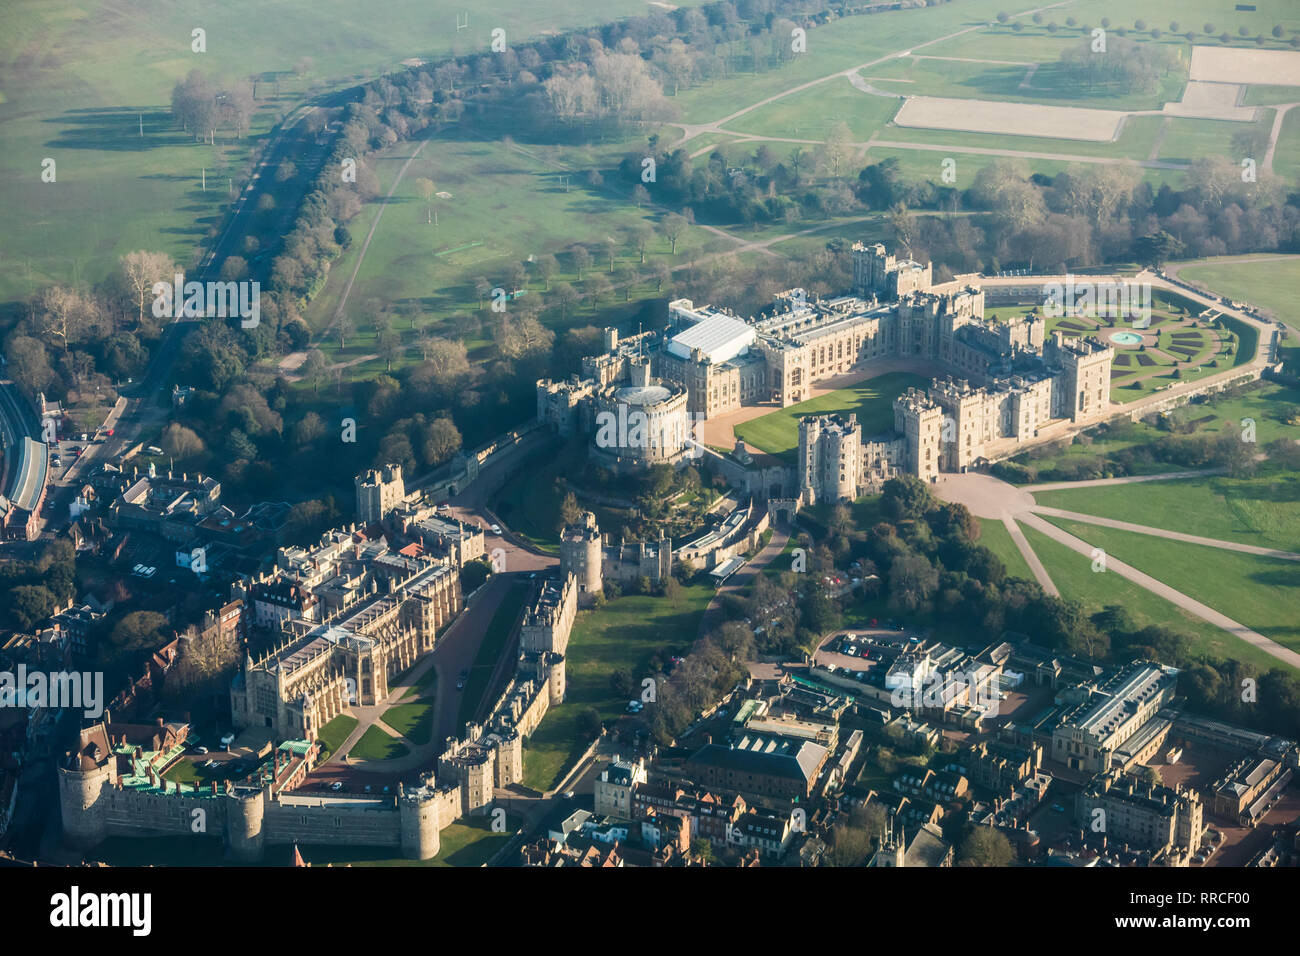 Aerial view of Windsor Castle, London, UK Stock Photo